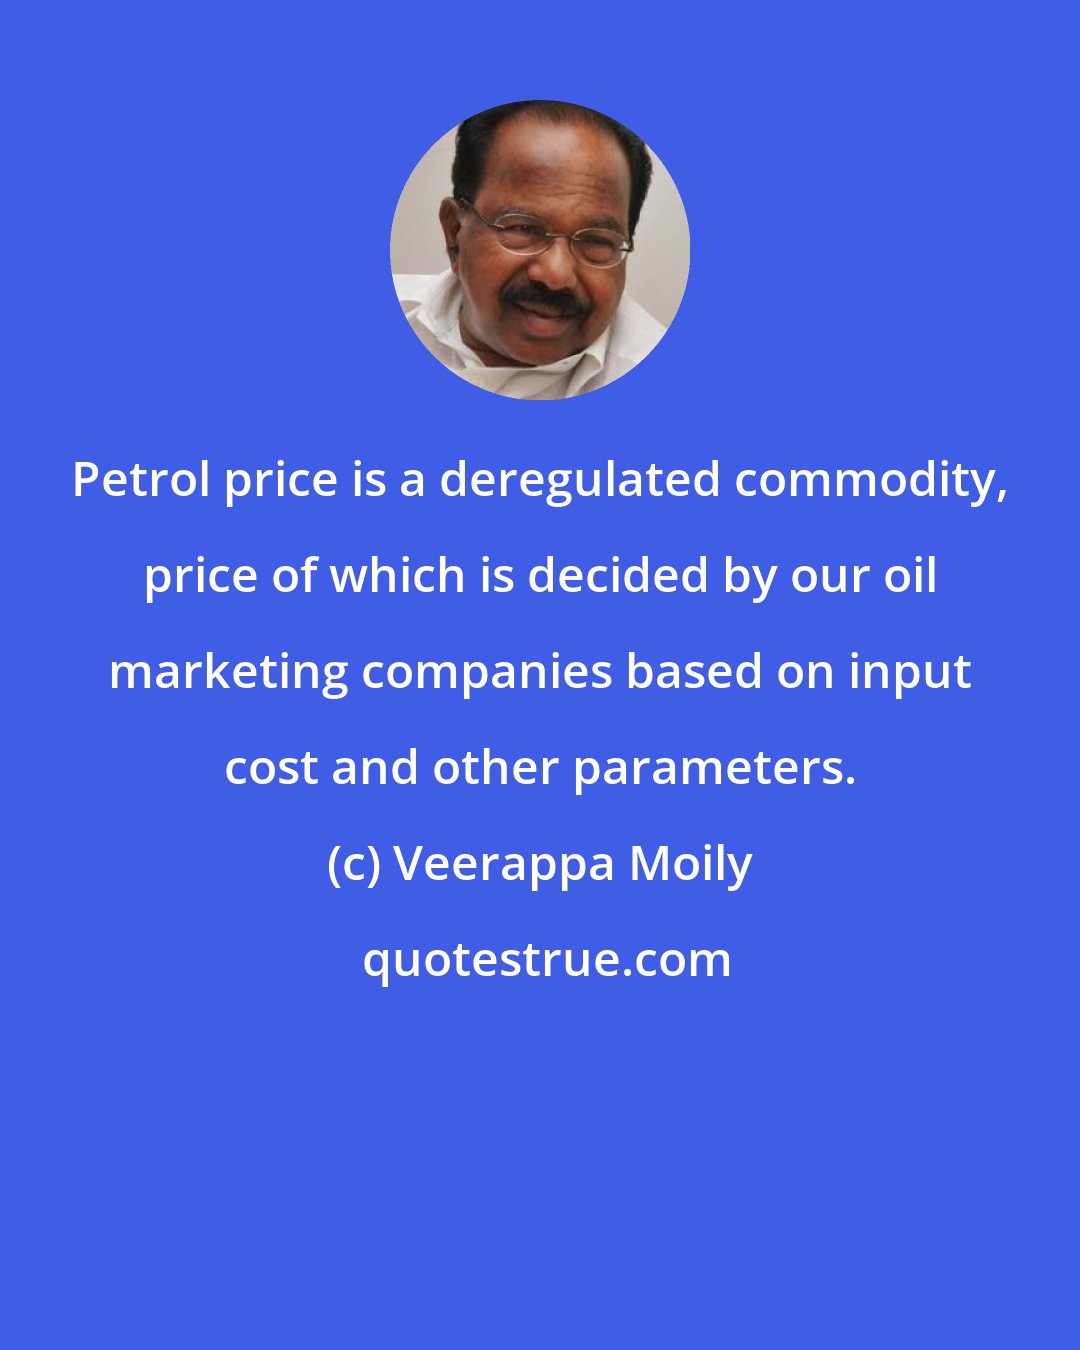 Veerappa Moily: Petrol price is a deregulated commodity, price of which is decided by our oil marketing companies based on input cost and other parameters.